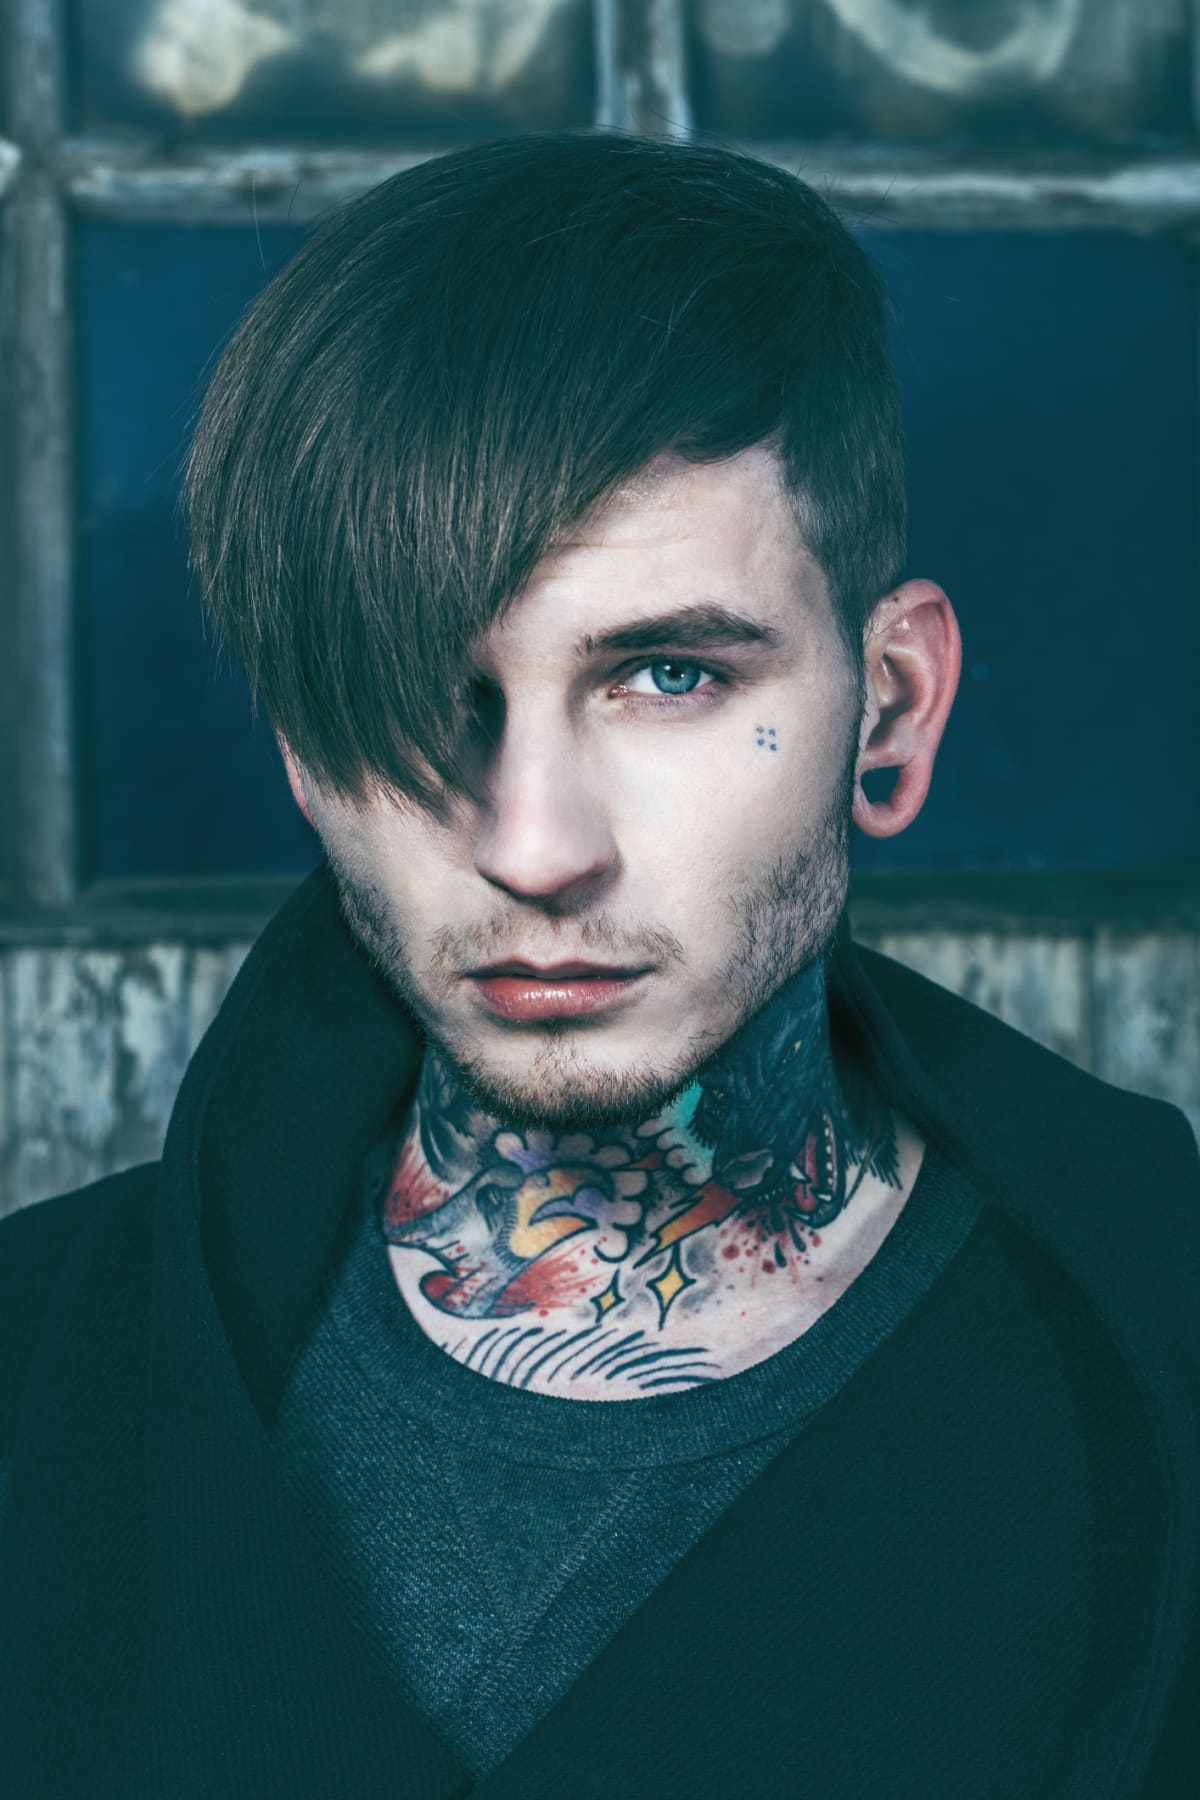 Ten Questions You Always Wanted to Ask a Person with a Face Tattoo